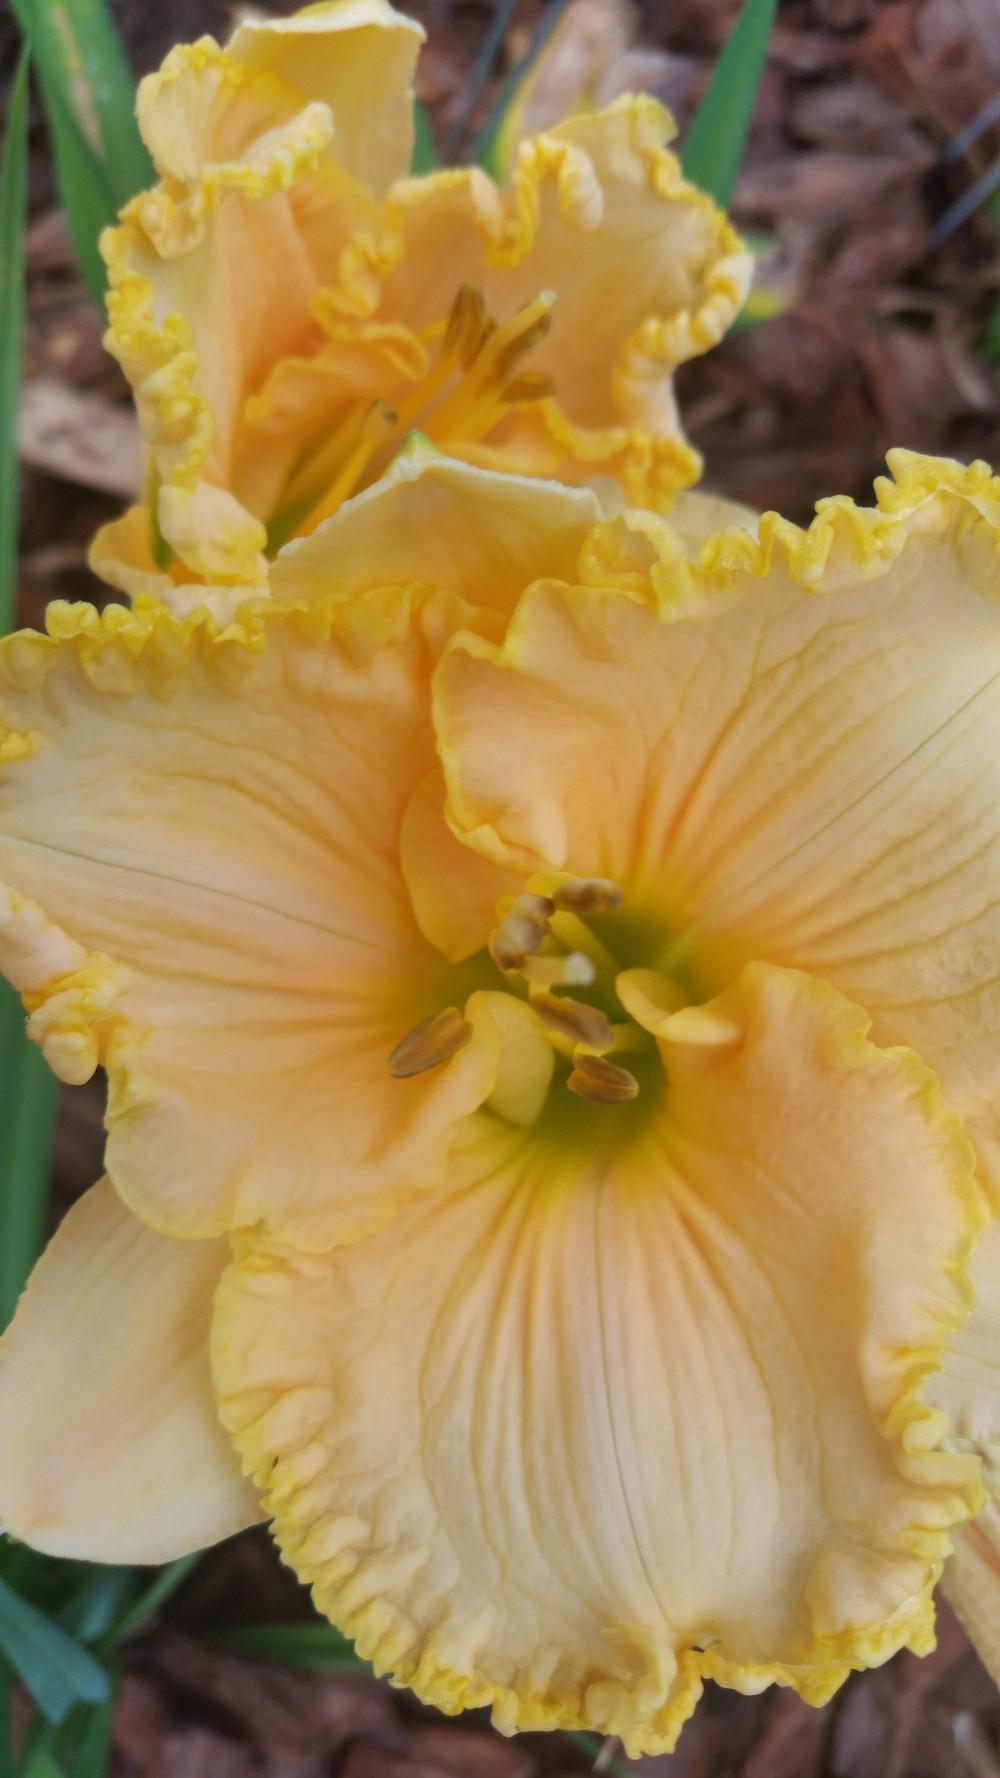 Photo of Daylily (Hemerocallis 'Sculpted Treasure') uploaded by value4dollars